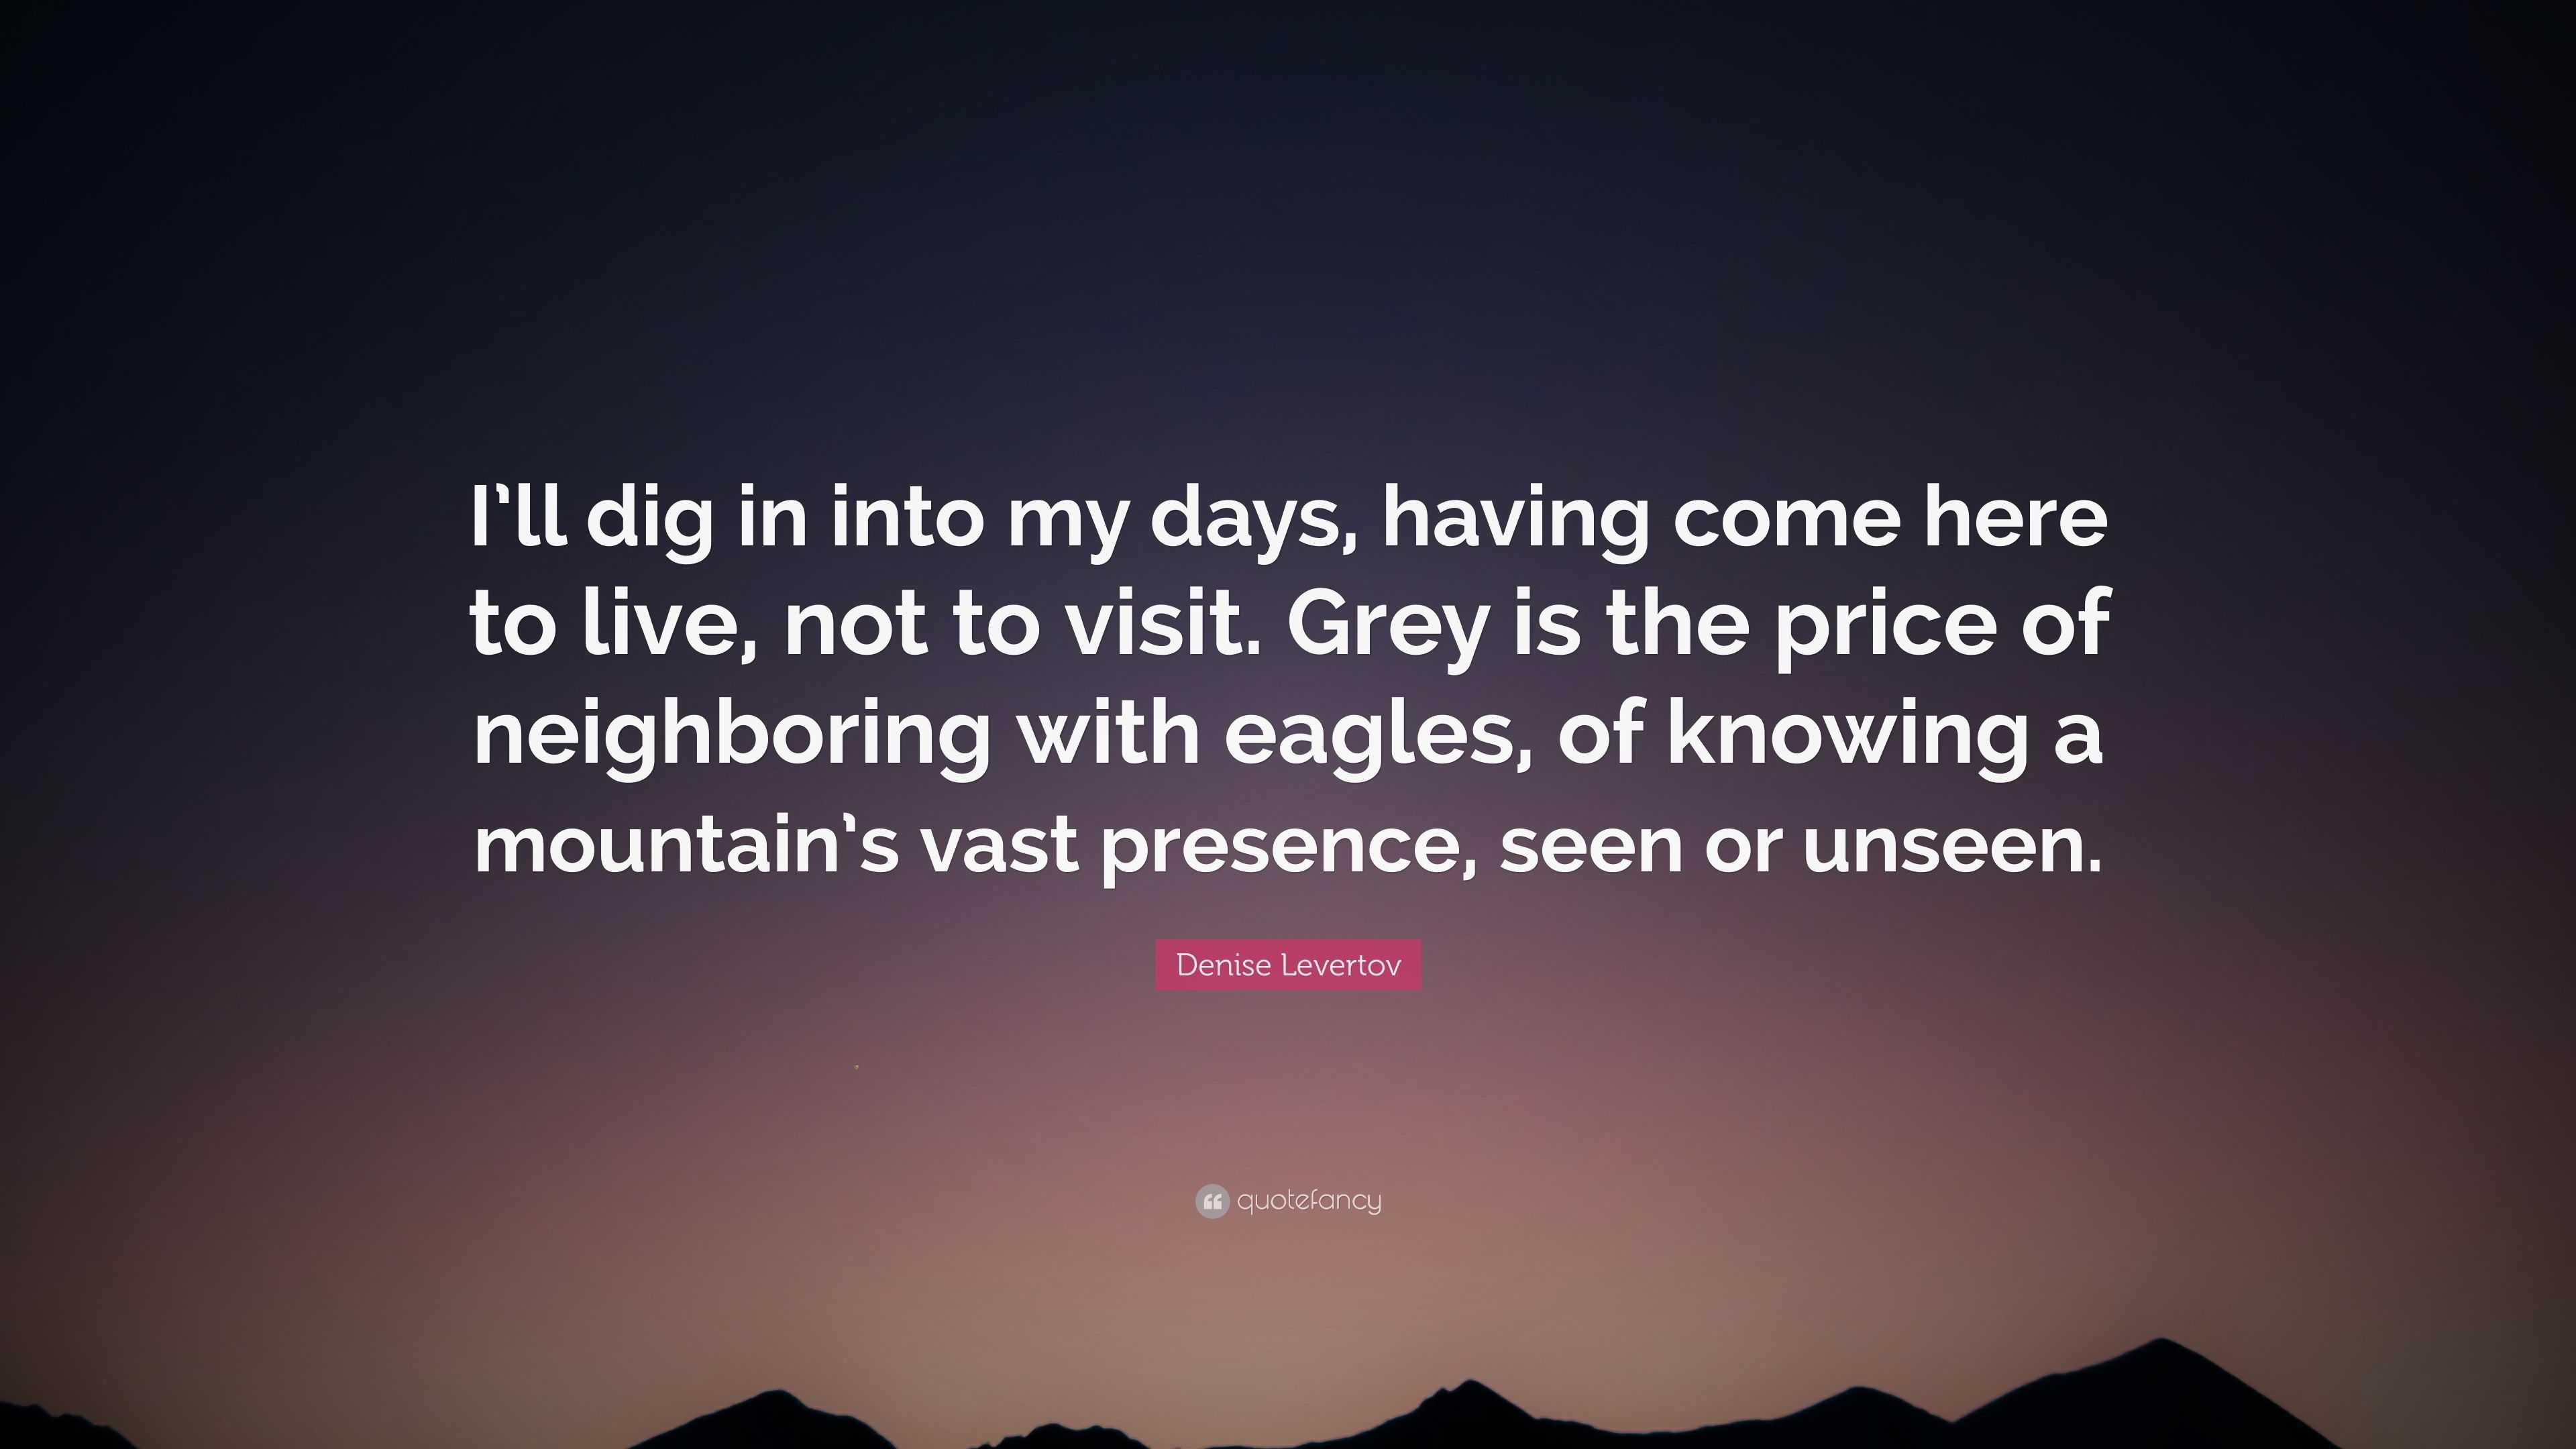 Denise Levertov Quote: “I'll dig in into my days, having come here to live,  not to visit. Grey is the price of neighboring with eagles, of knowi”